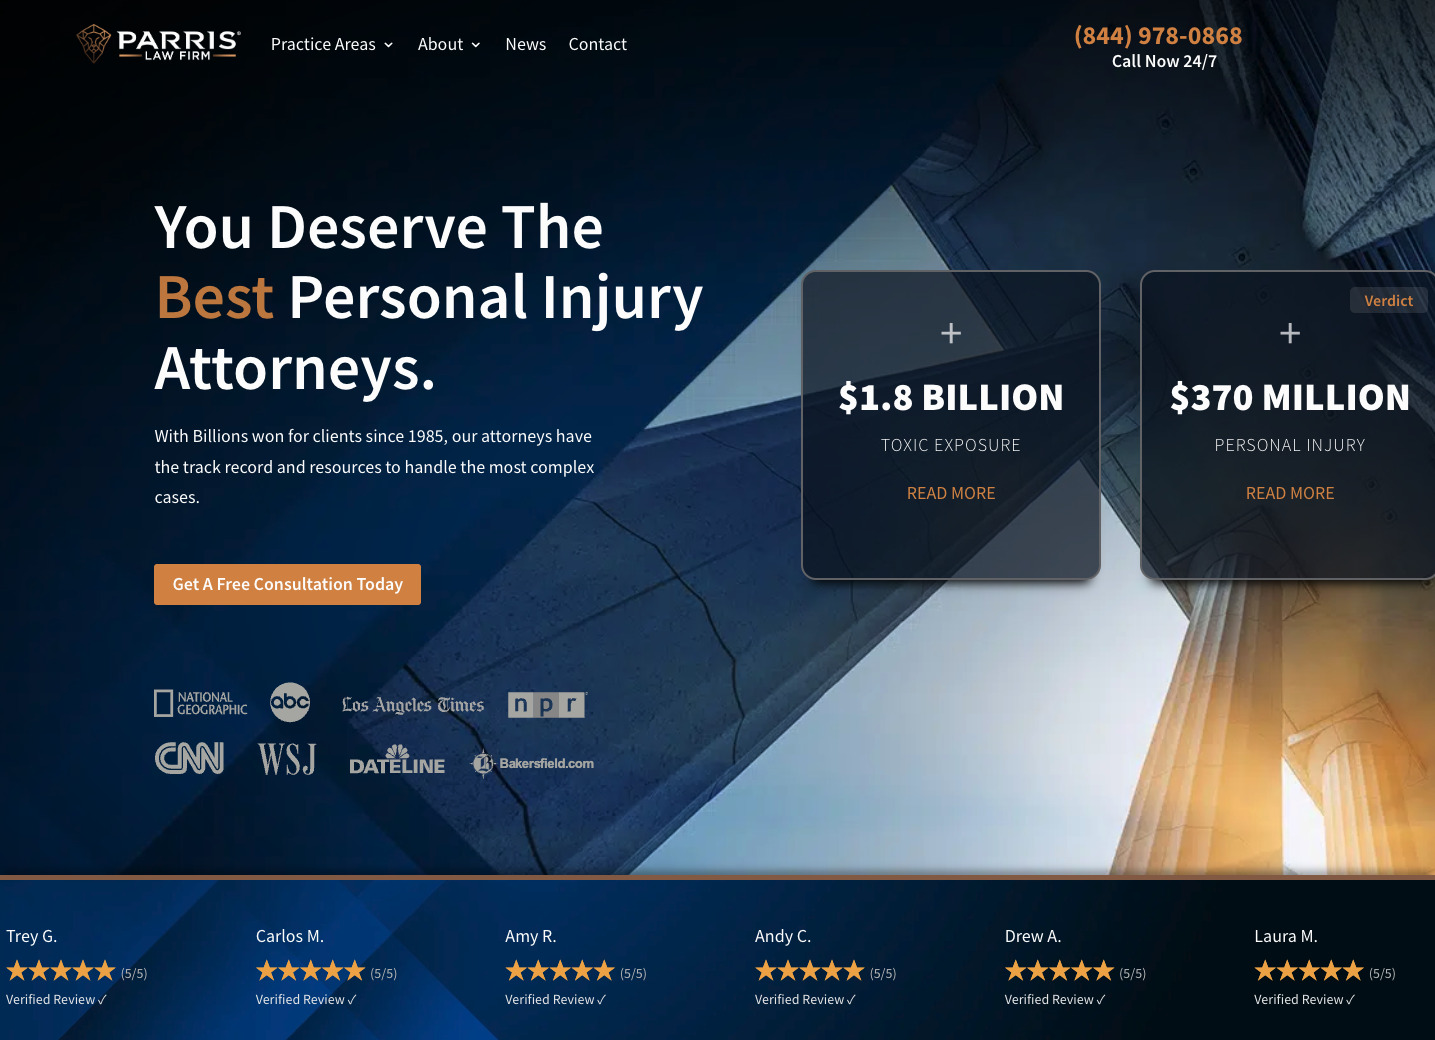 Parris Law Firm's home page design